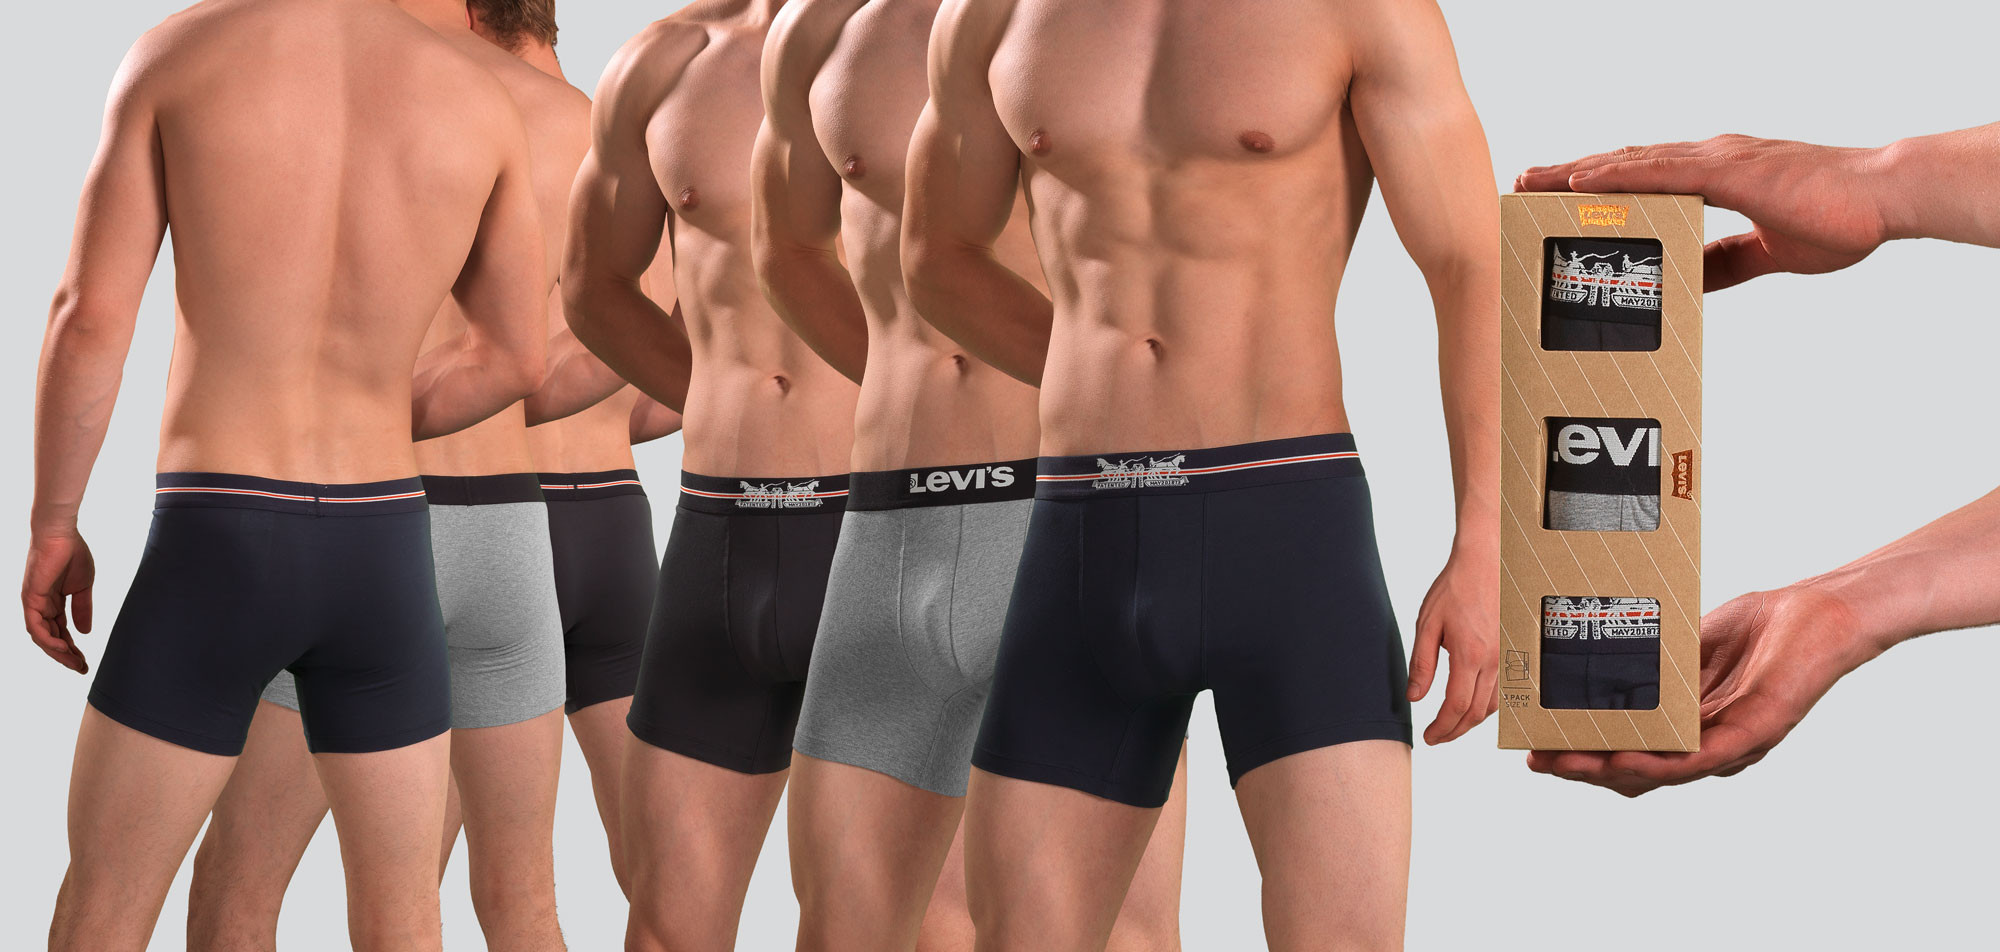 Levi_s Boxer Brief 3-Pack 663 Giftbox 2 Horse Pull Logo, color Nee